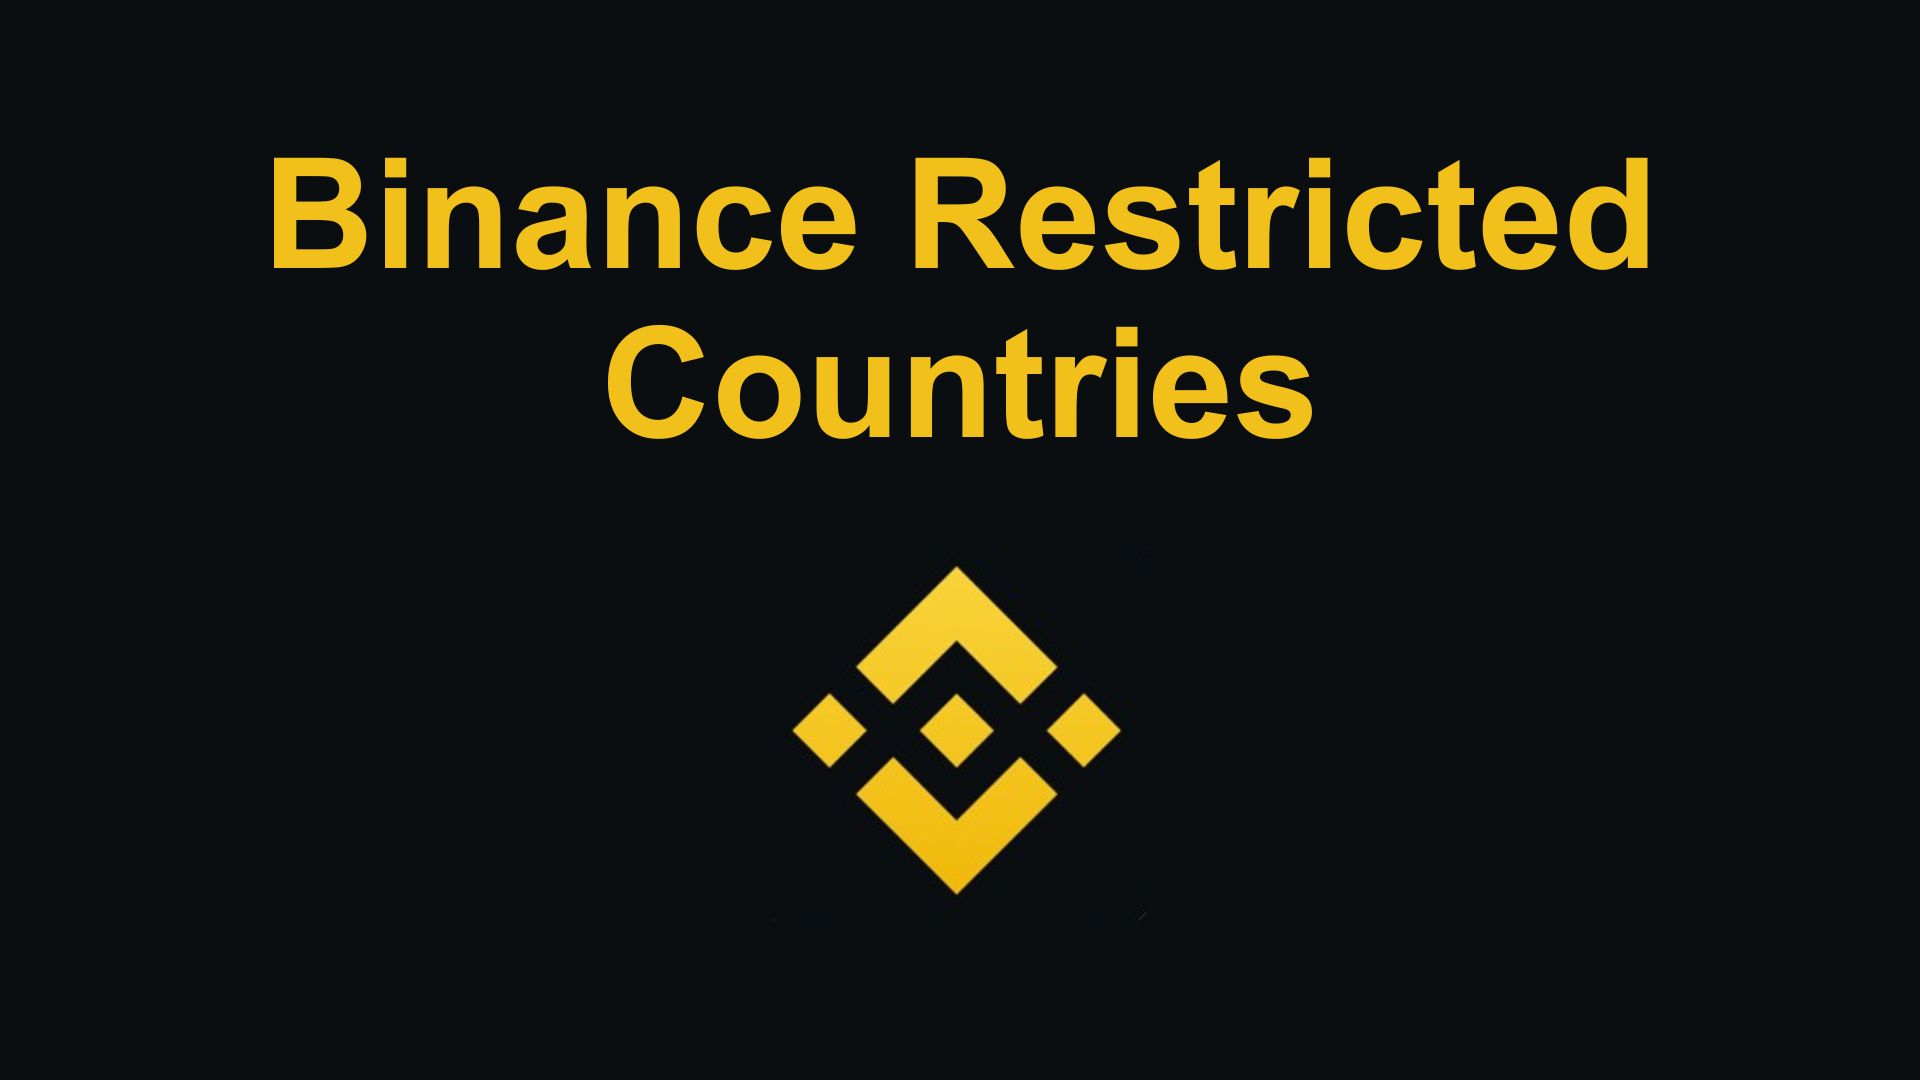 Binance Restricted Countries